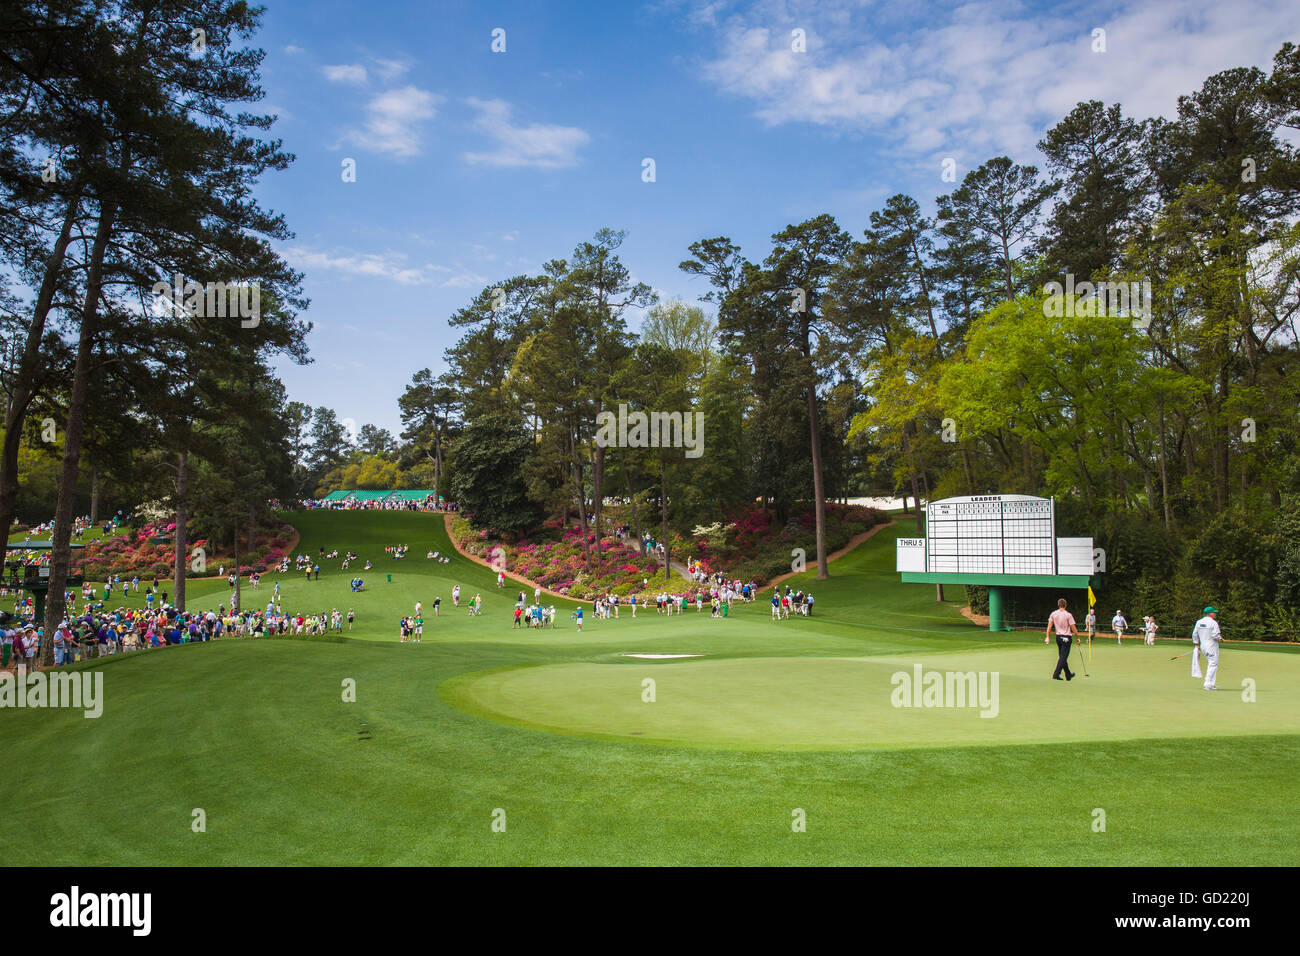 Masters Golf High Resolution Stock Photography and Images - Alamy